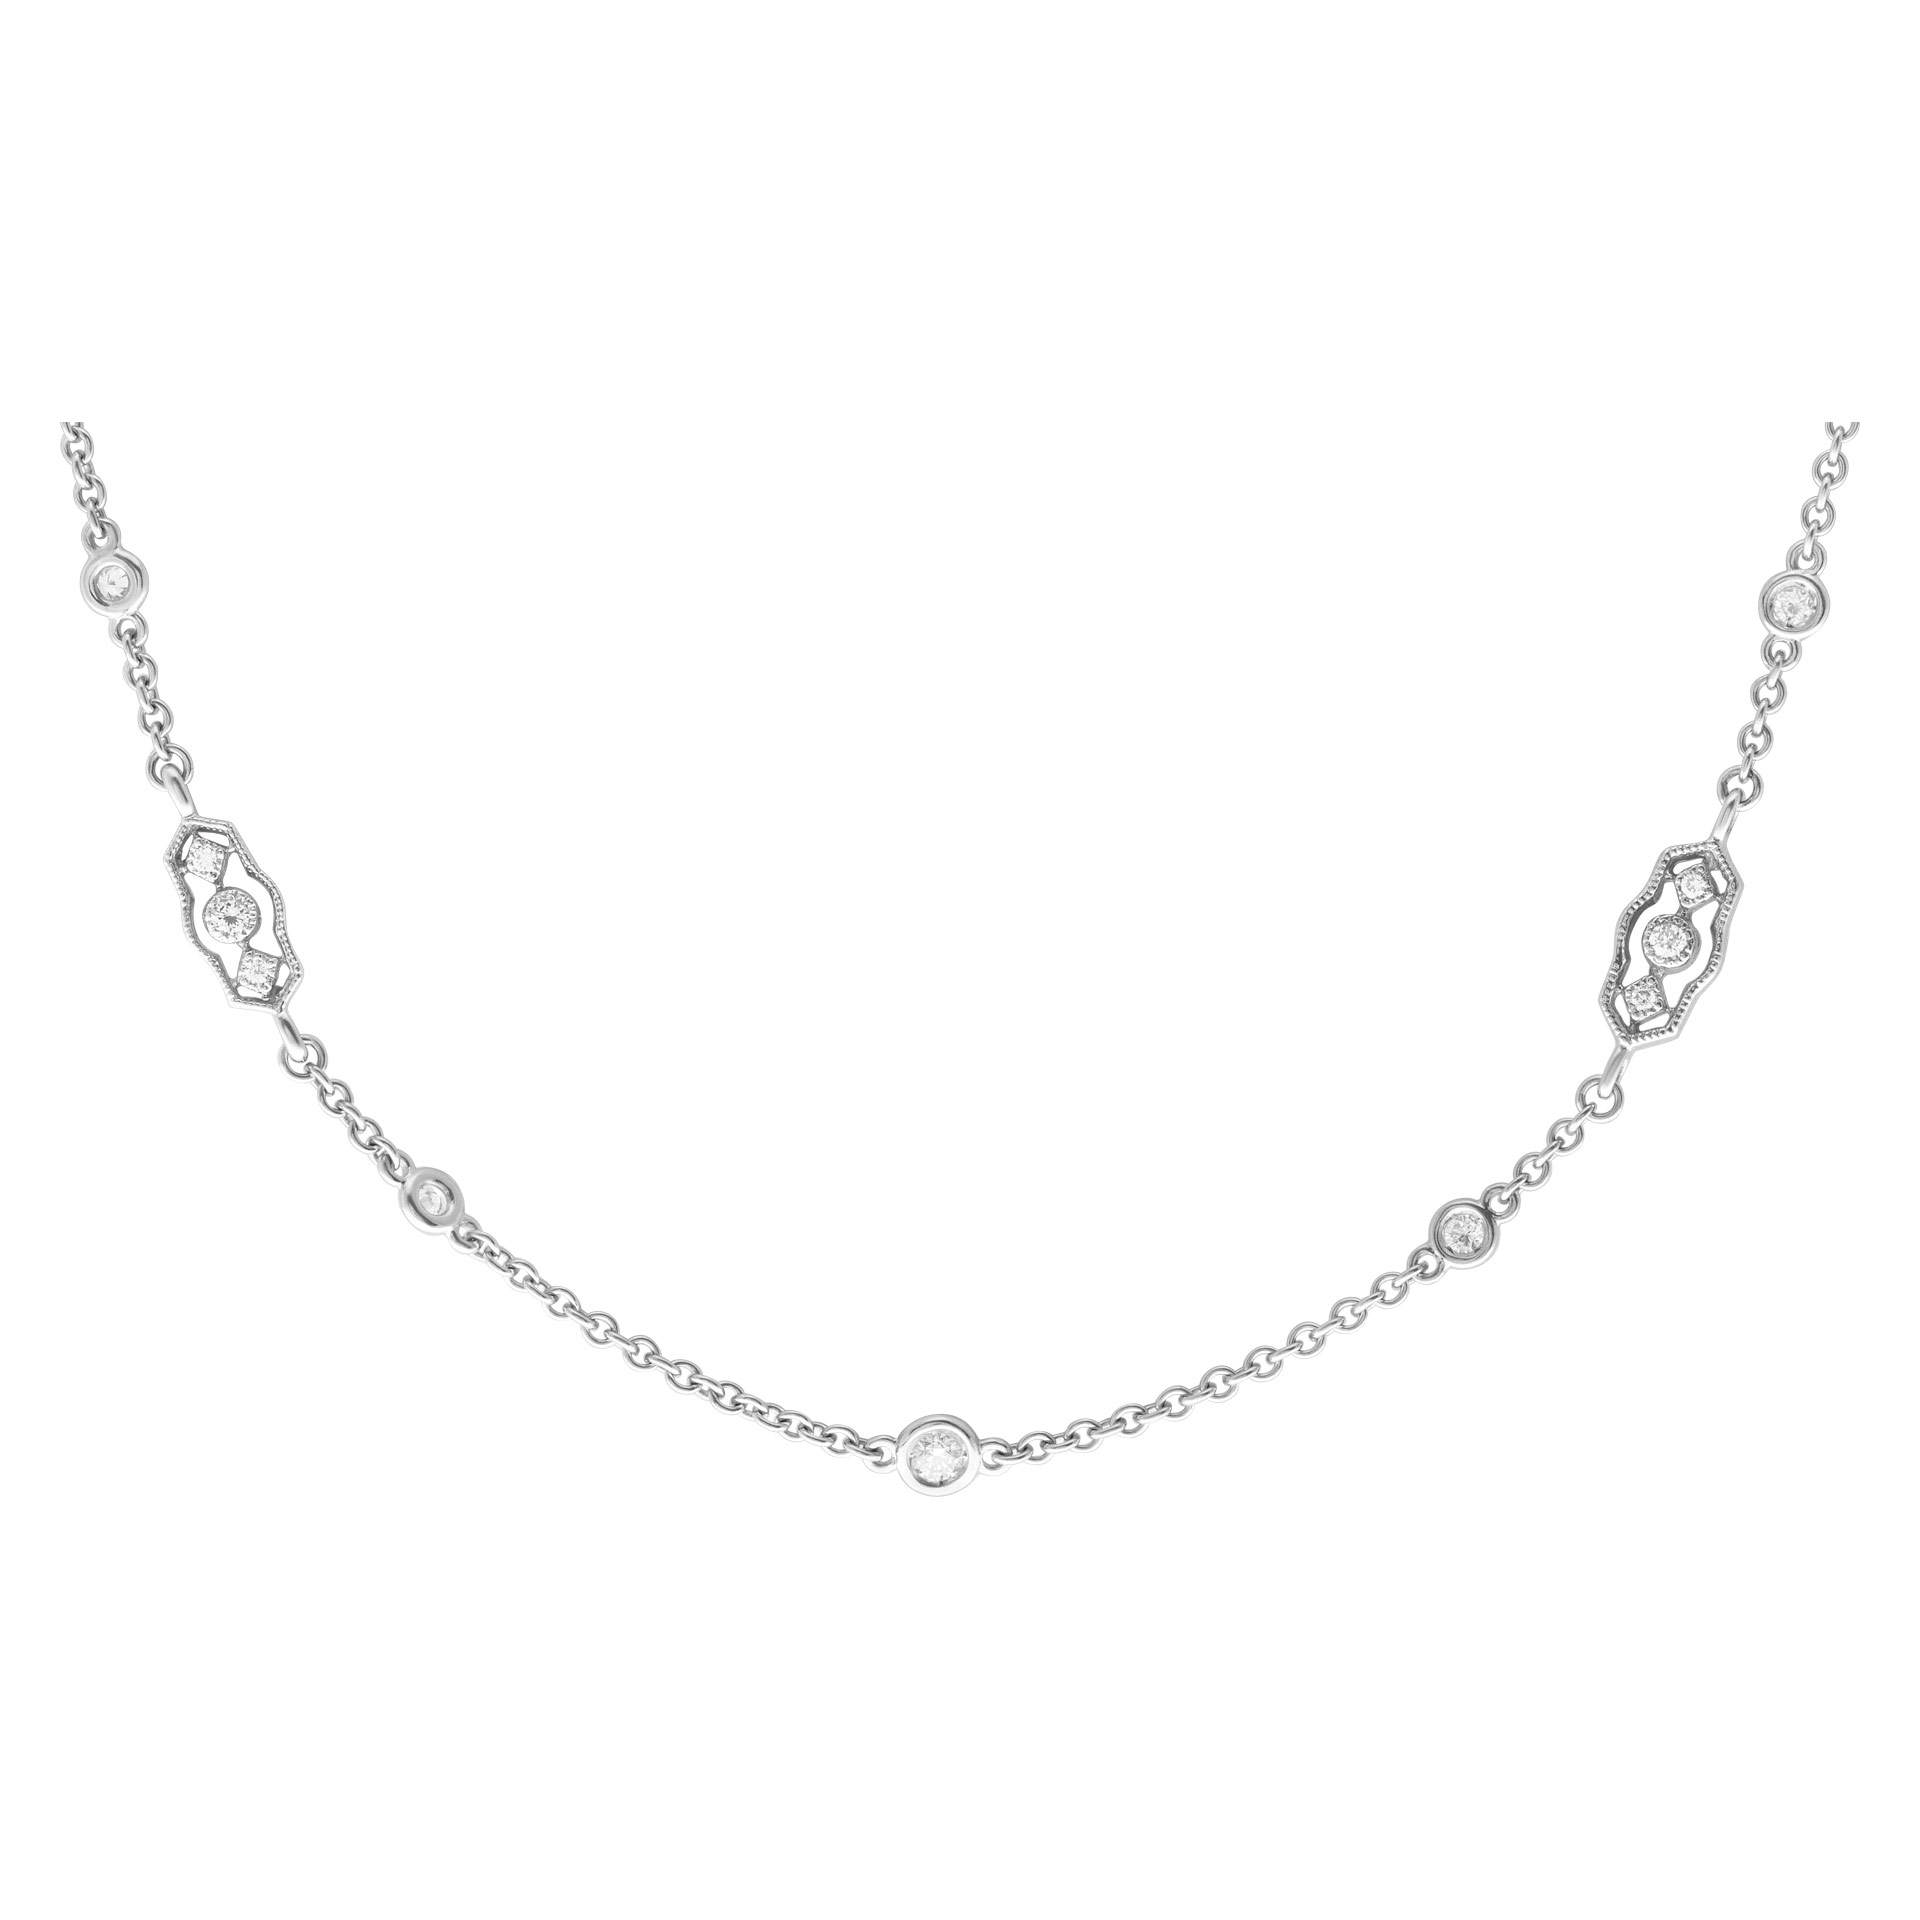 Diamonds by the yard necklace in 14k white gold with 2.78 cts